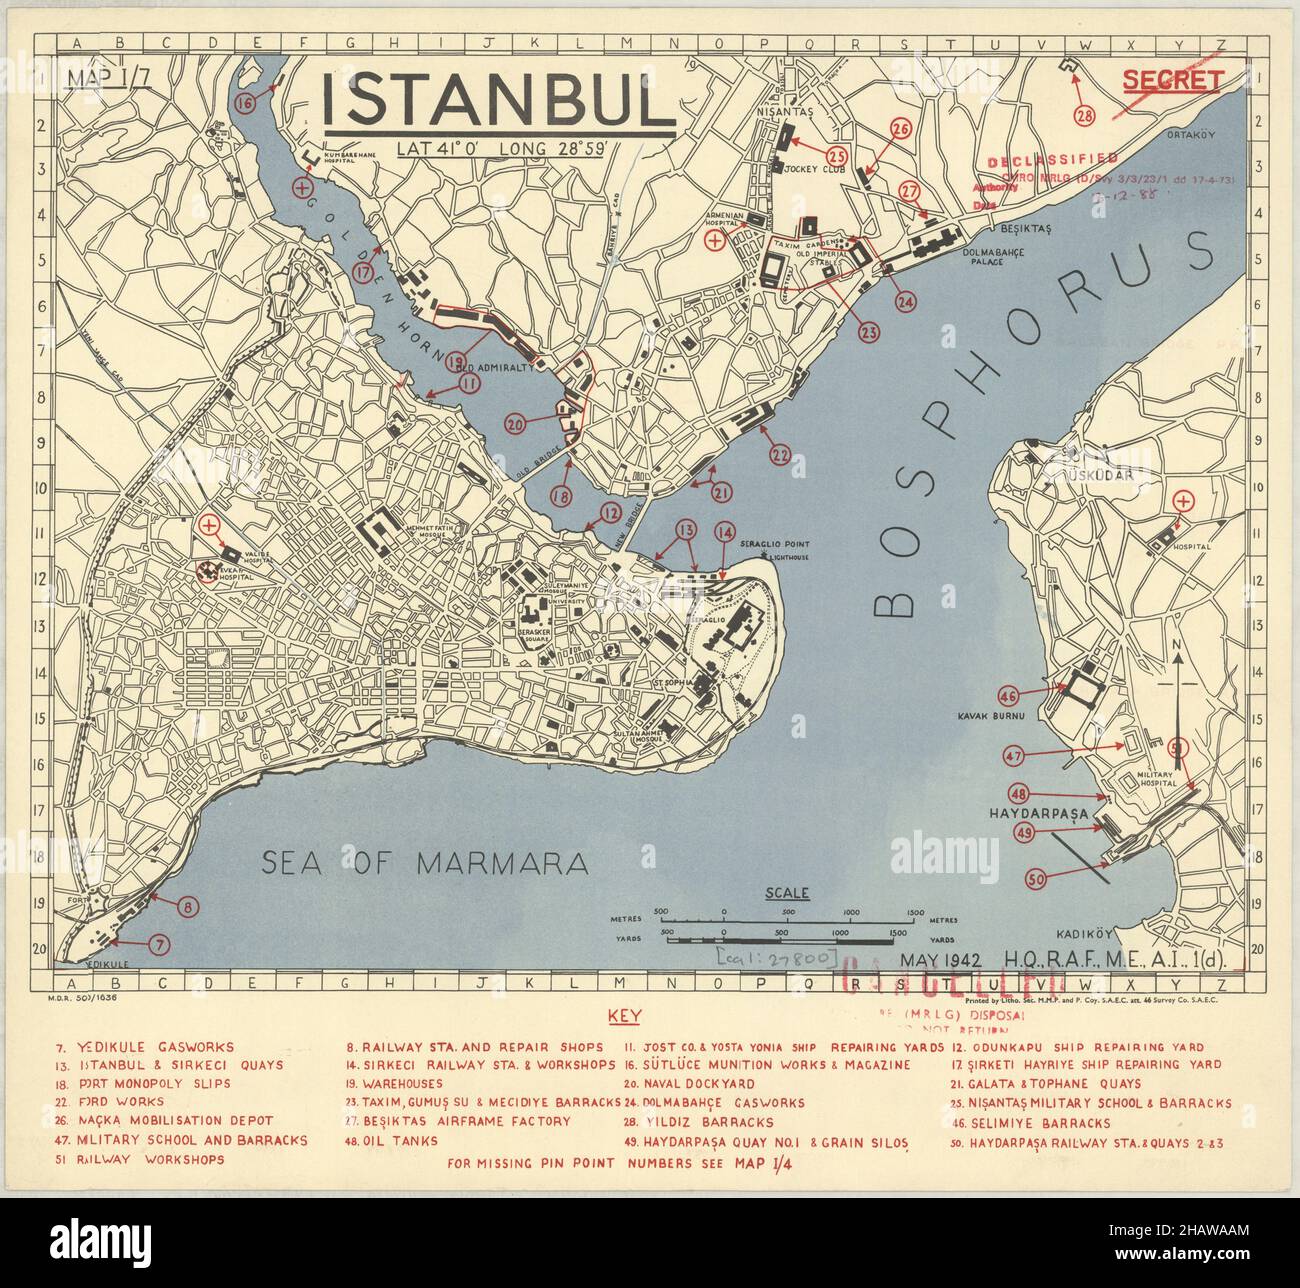 Constantinople Map, Map of Constantinople, Old Constantinople Map, Retro Constantinople Map, Vintage Constantinople Map, Old Istanbul Map, Turkey Map Stock Photo